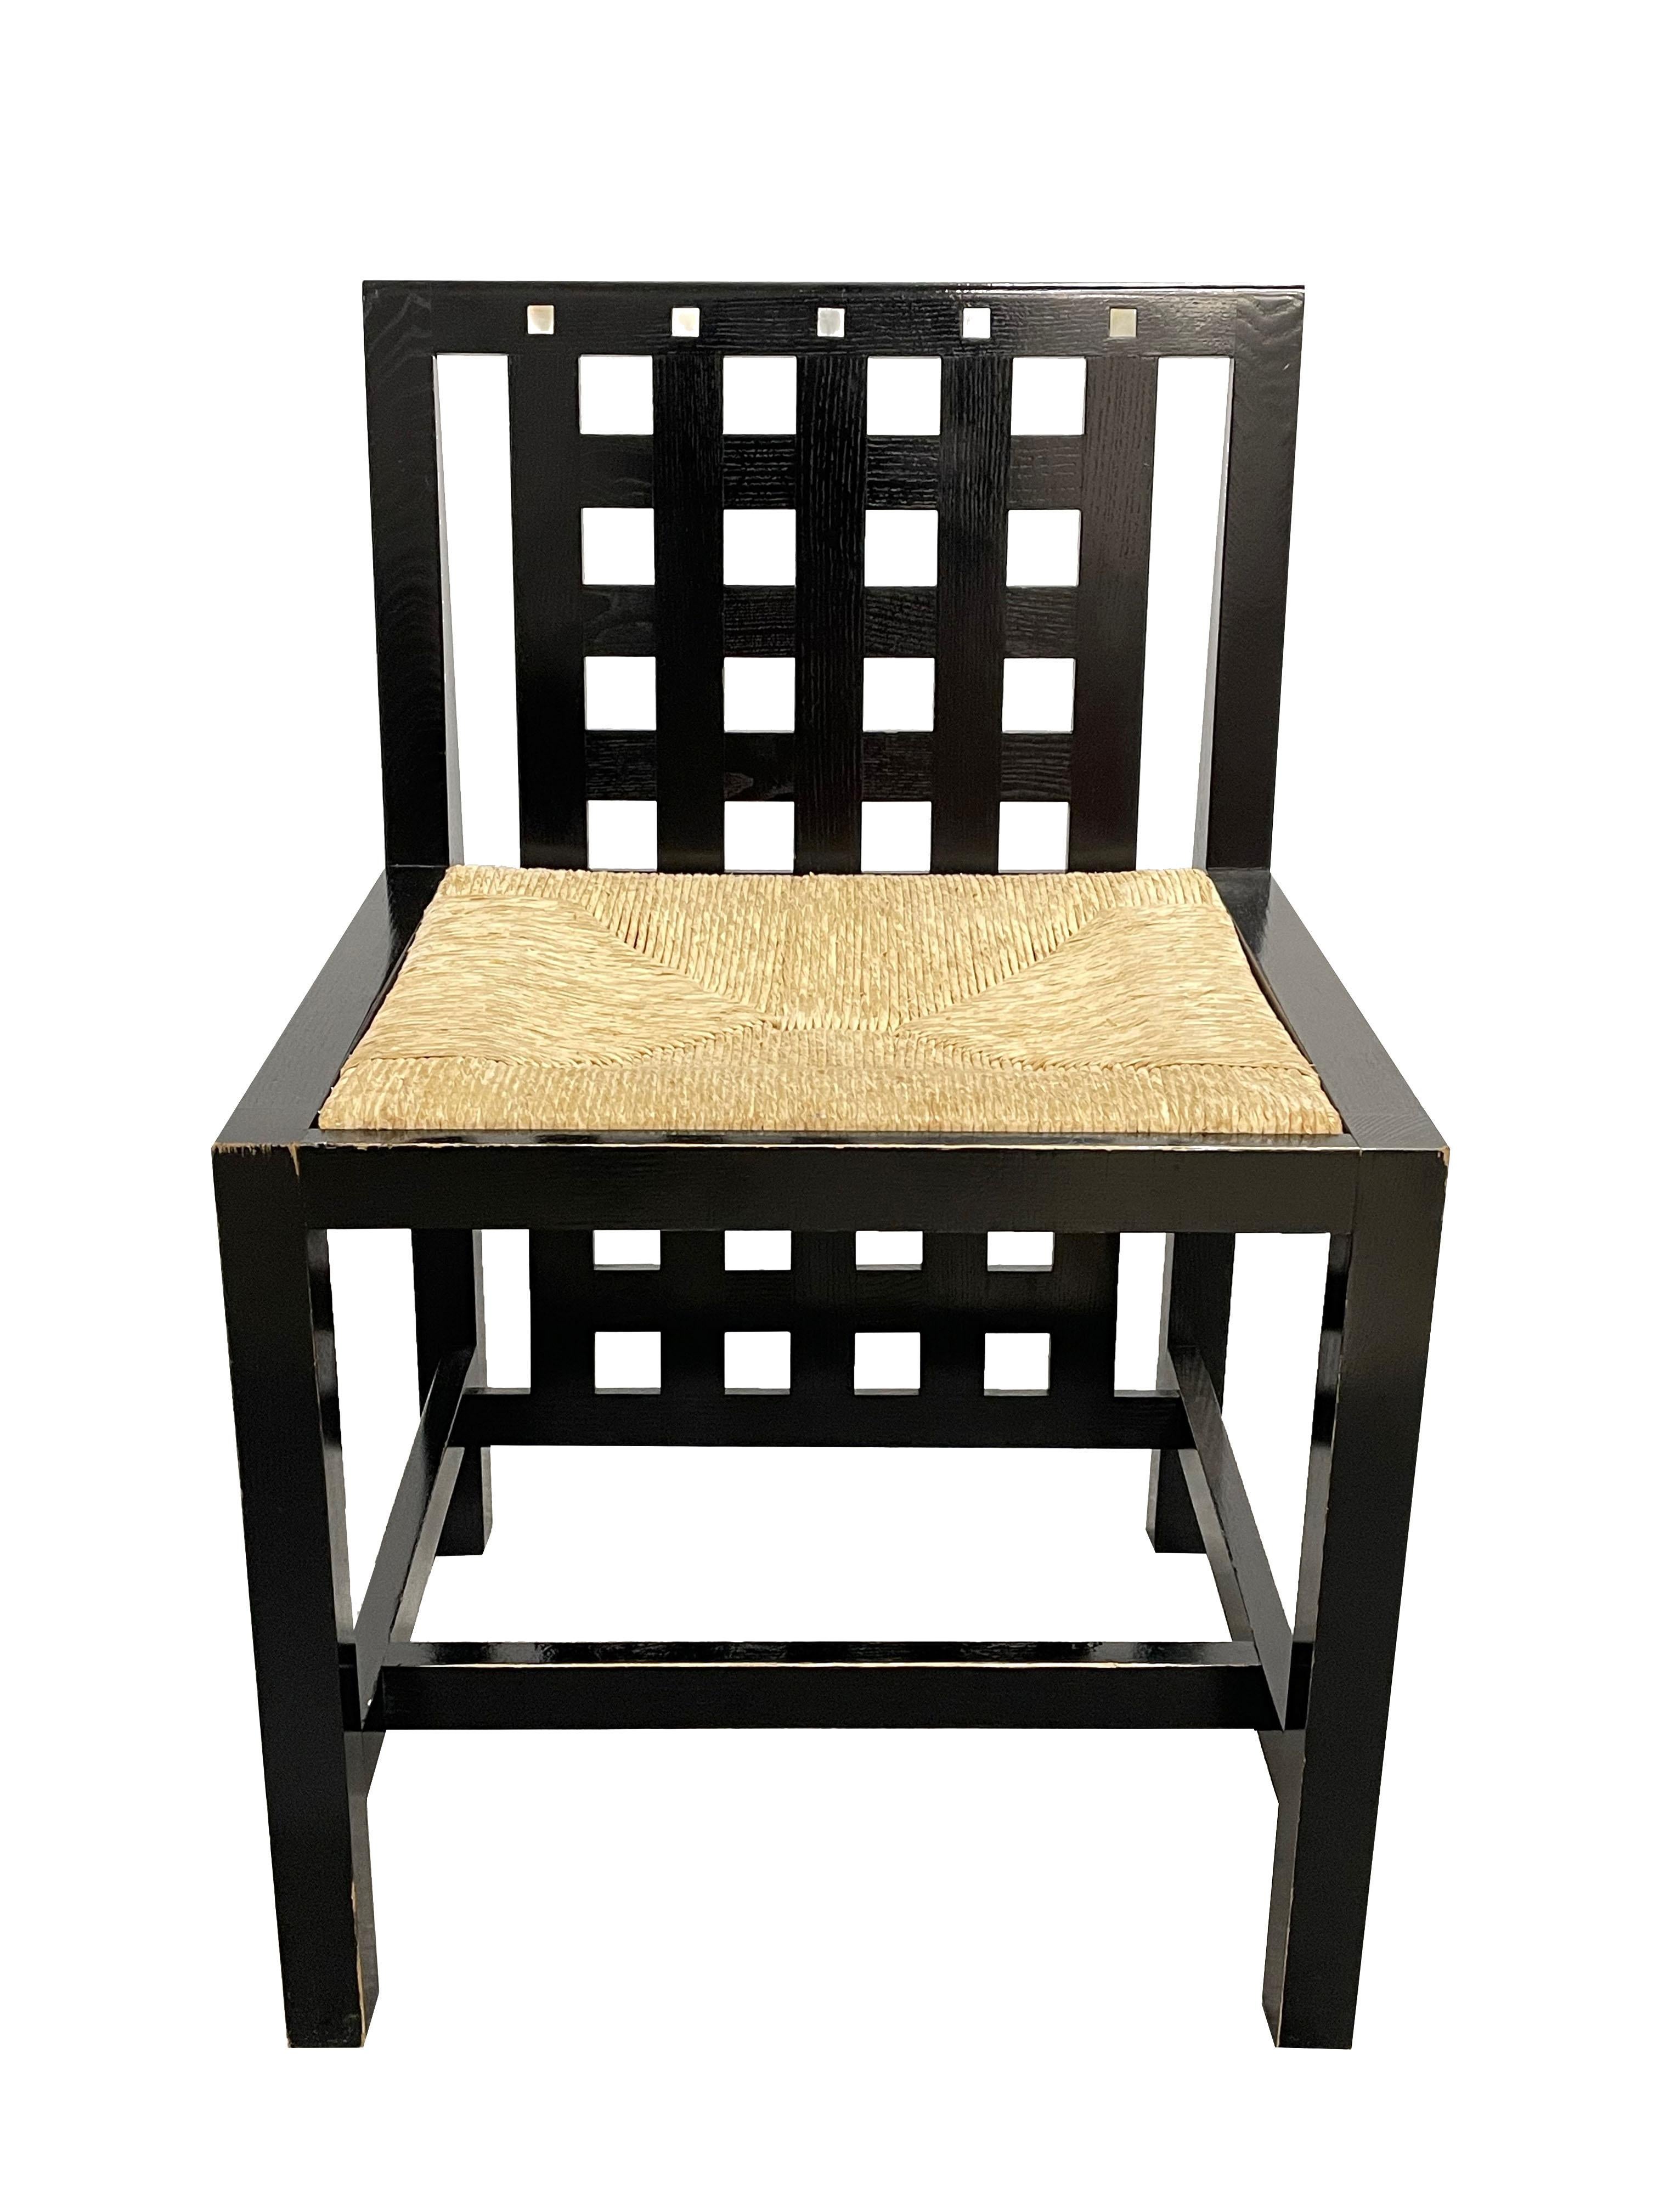 Set of four chairs DS3 design Charles Rennie Mackintosh 1897, Structure in solid ebonized ash with seat in real straw.
Measures: Cm. 49 x 45 height 75, seat 45 cm.